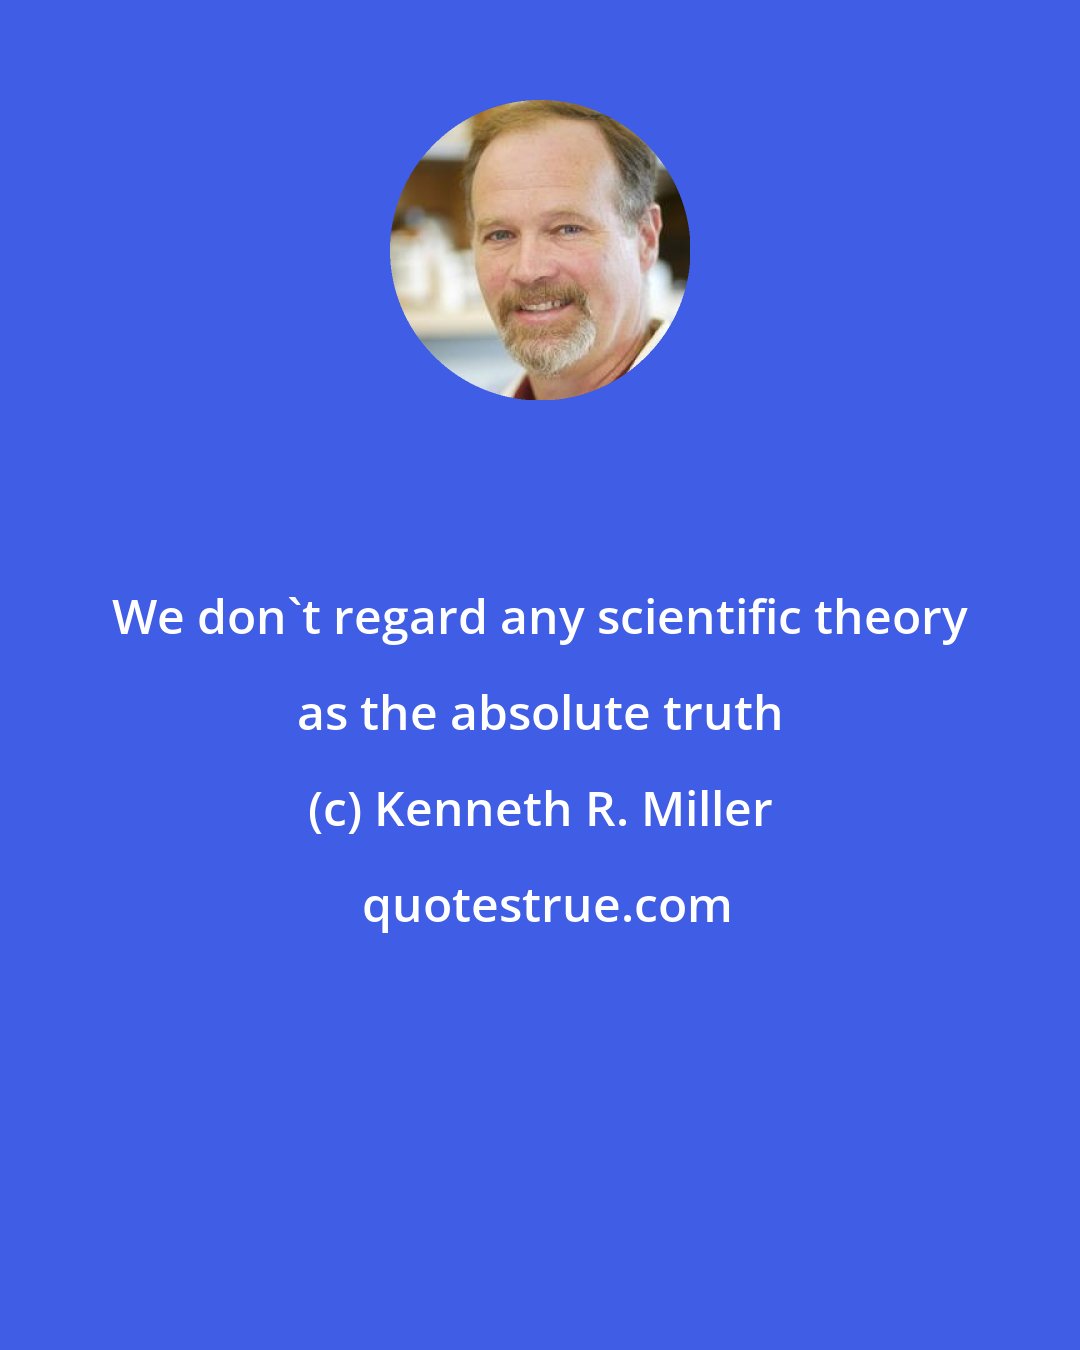 Kenneth R. Miller: We don't regard any scientific theory as the absolute truth